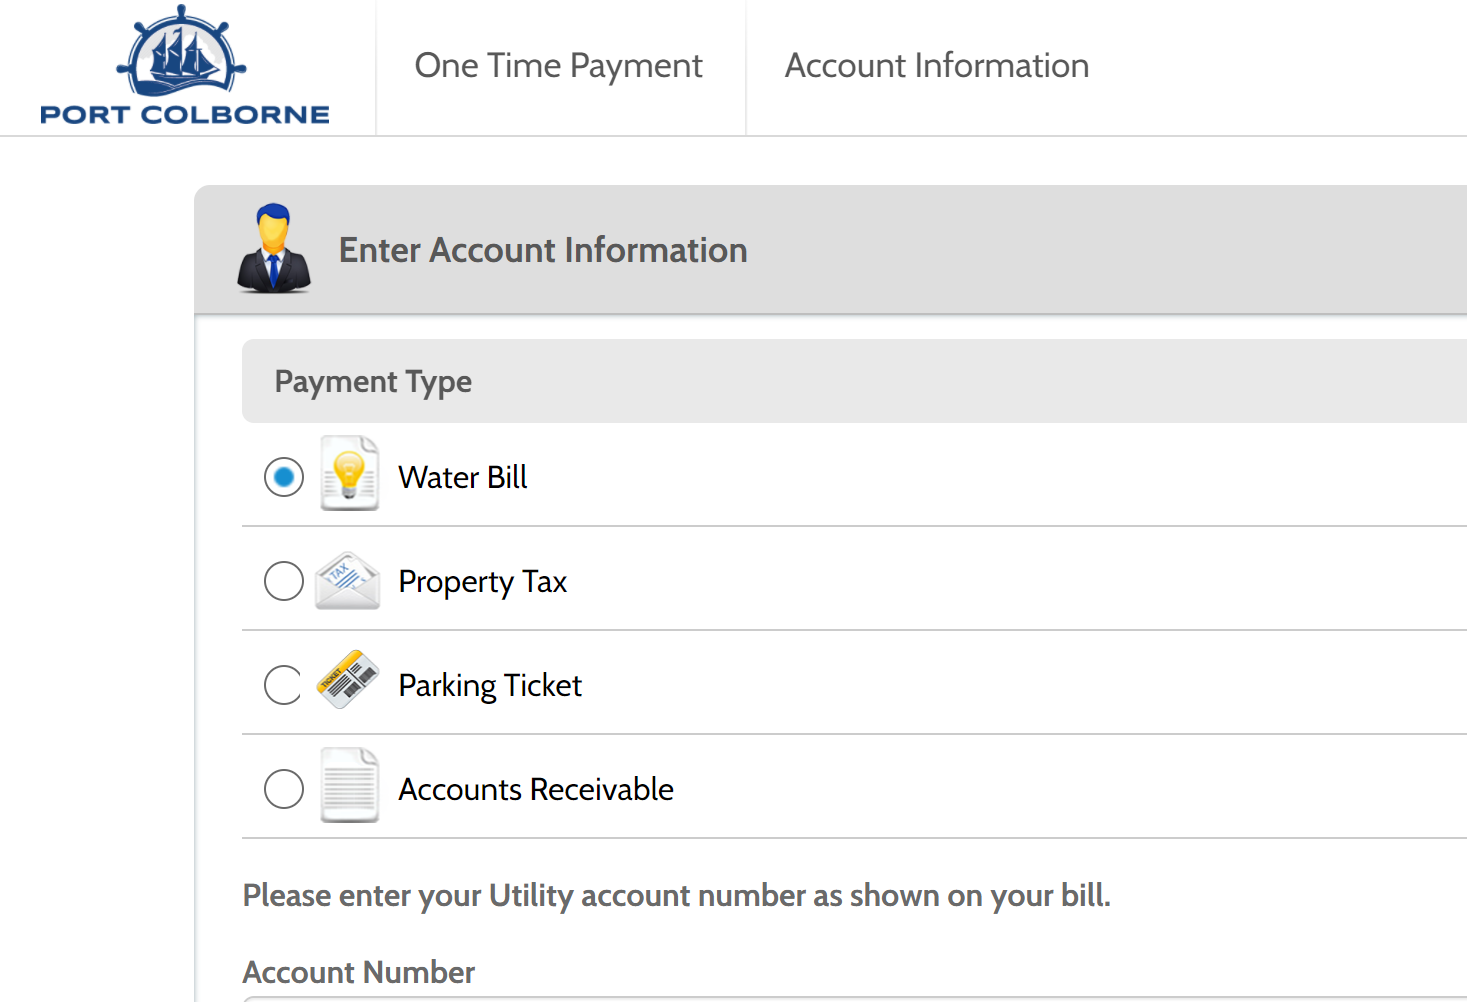 One Time Payment Portal